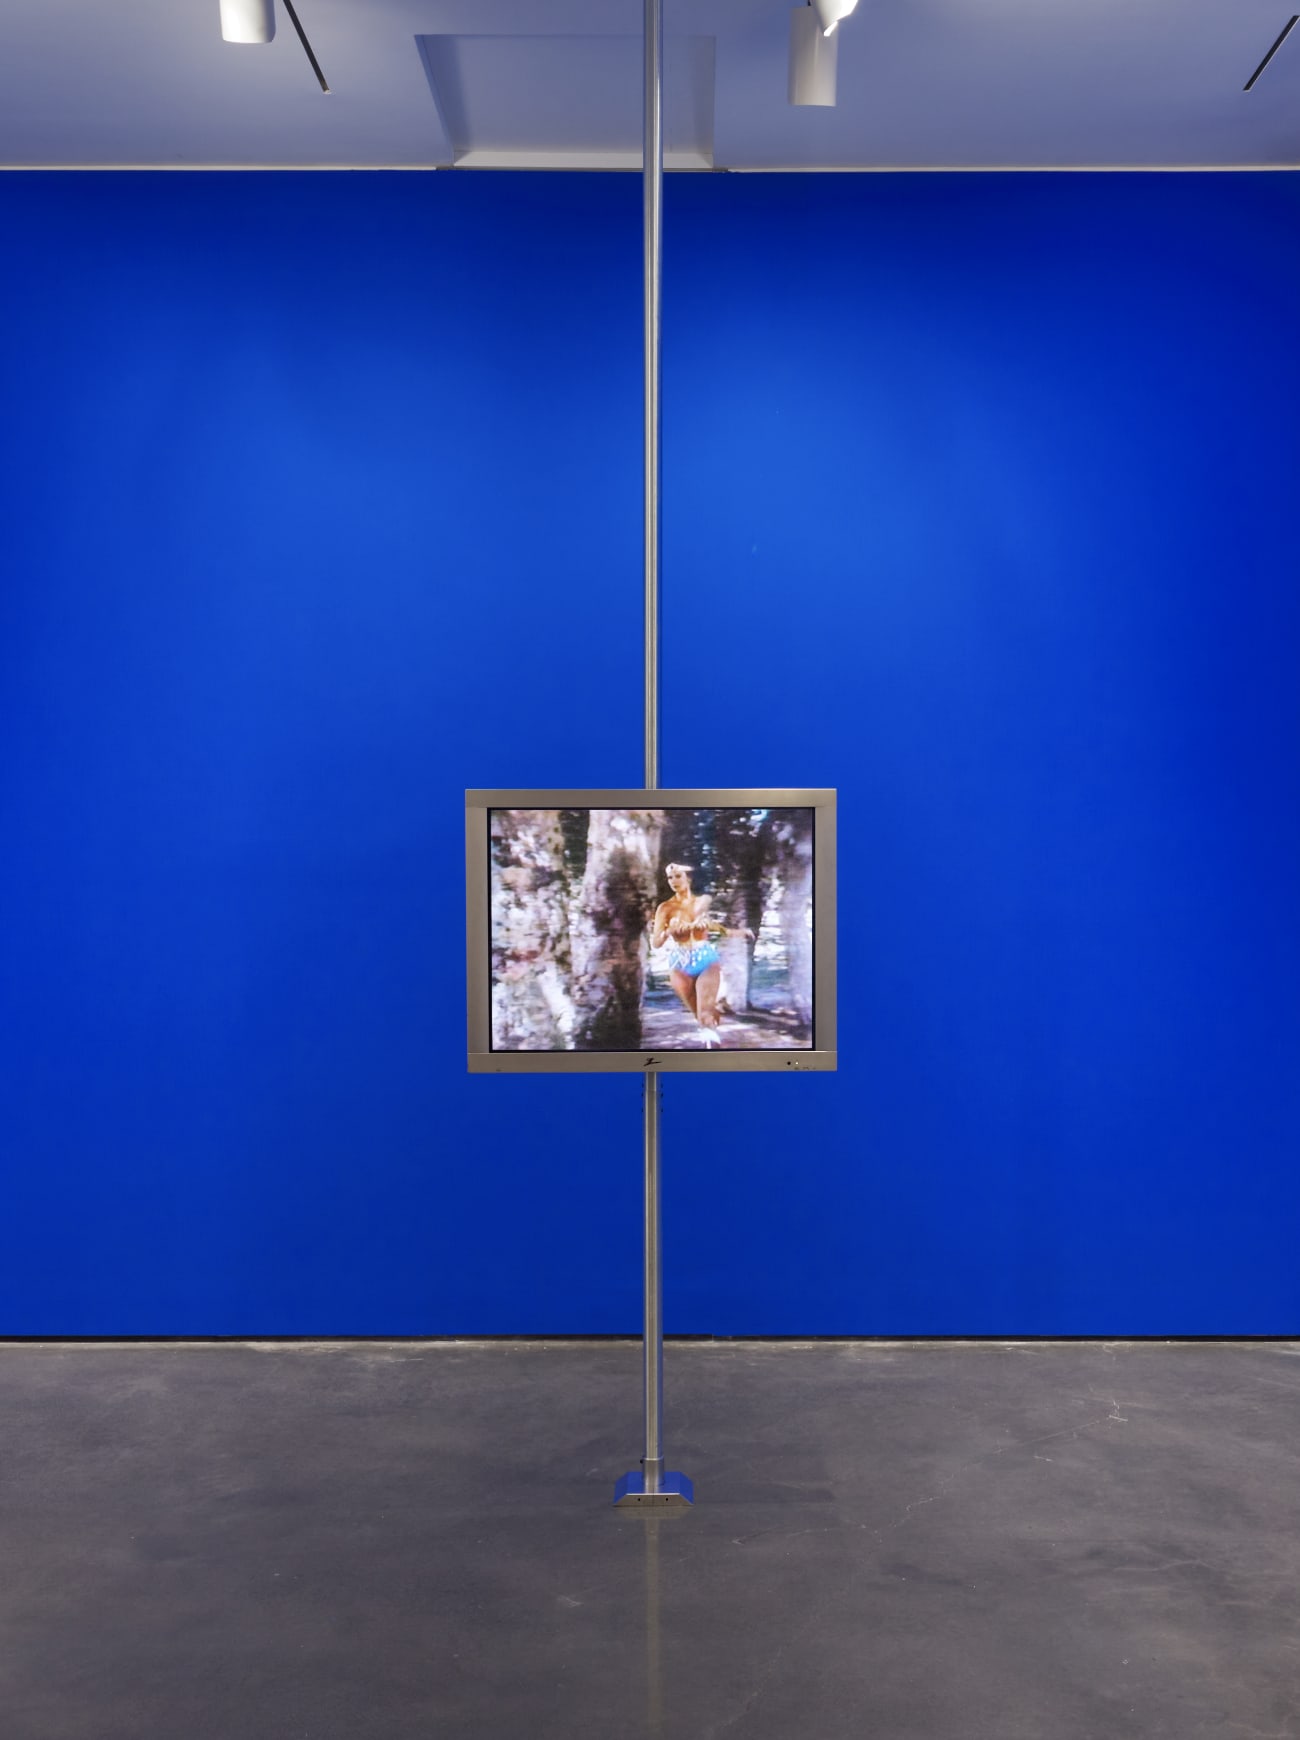 Installation by Dara Birnbaum in front of a bright blue wall